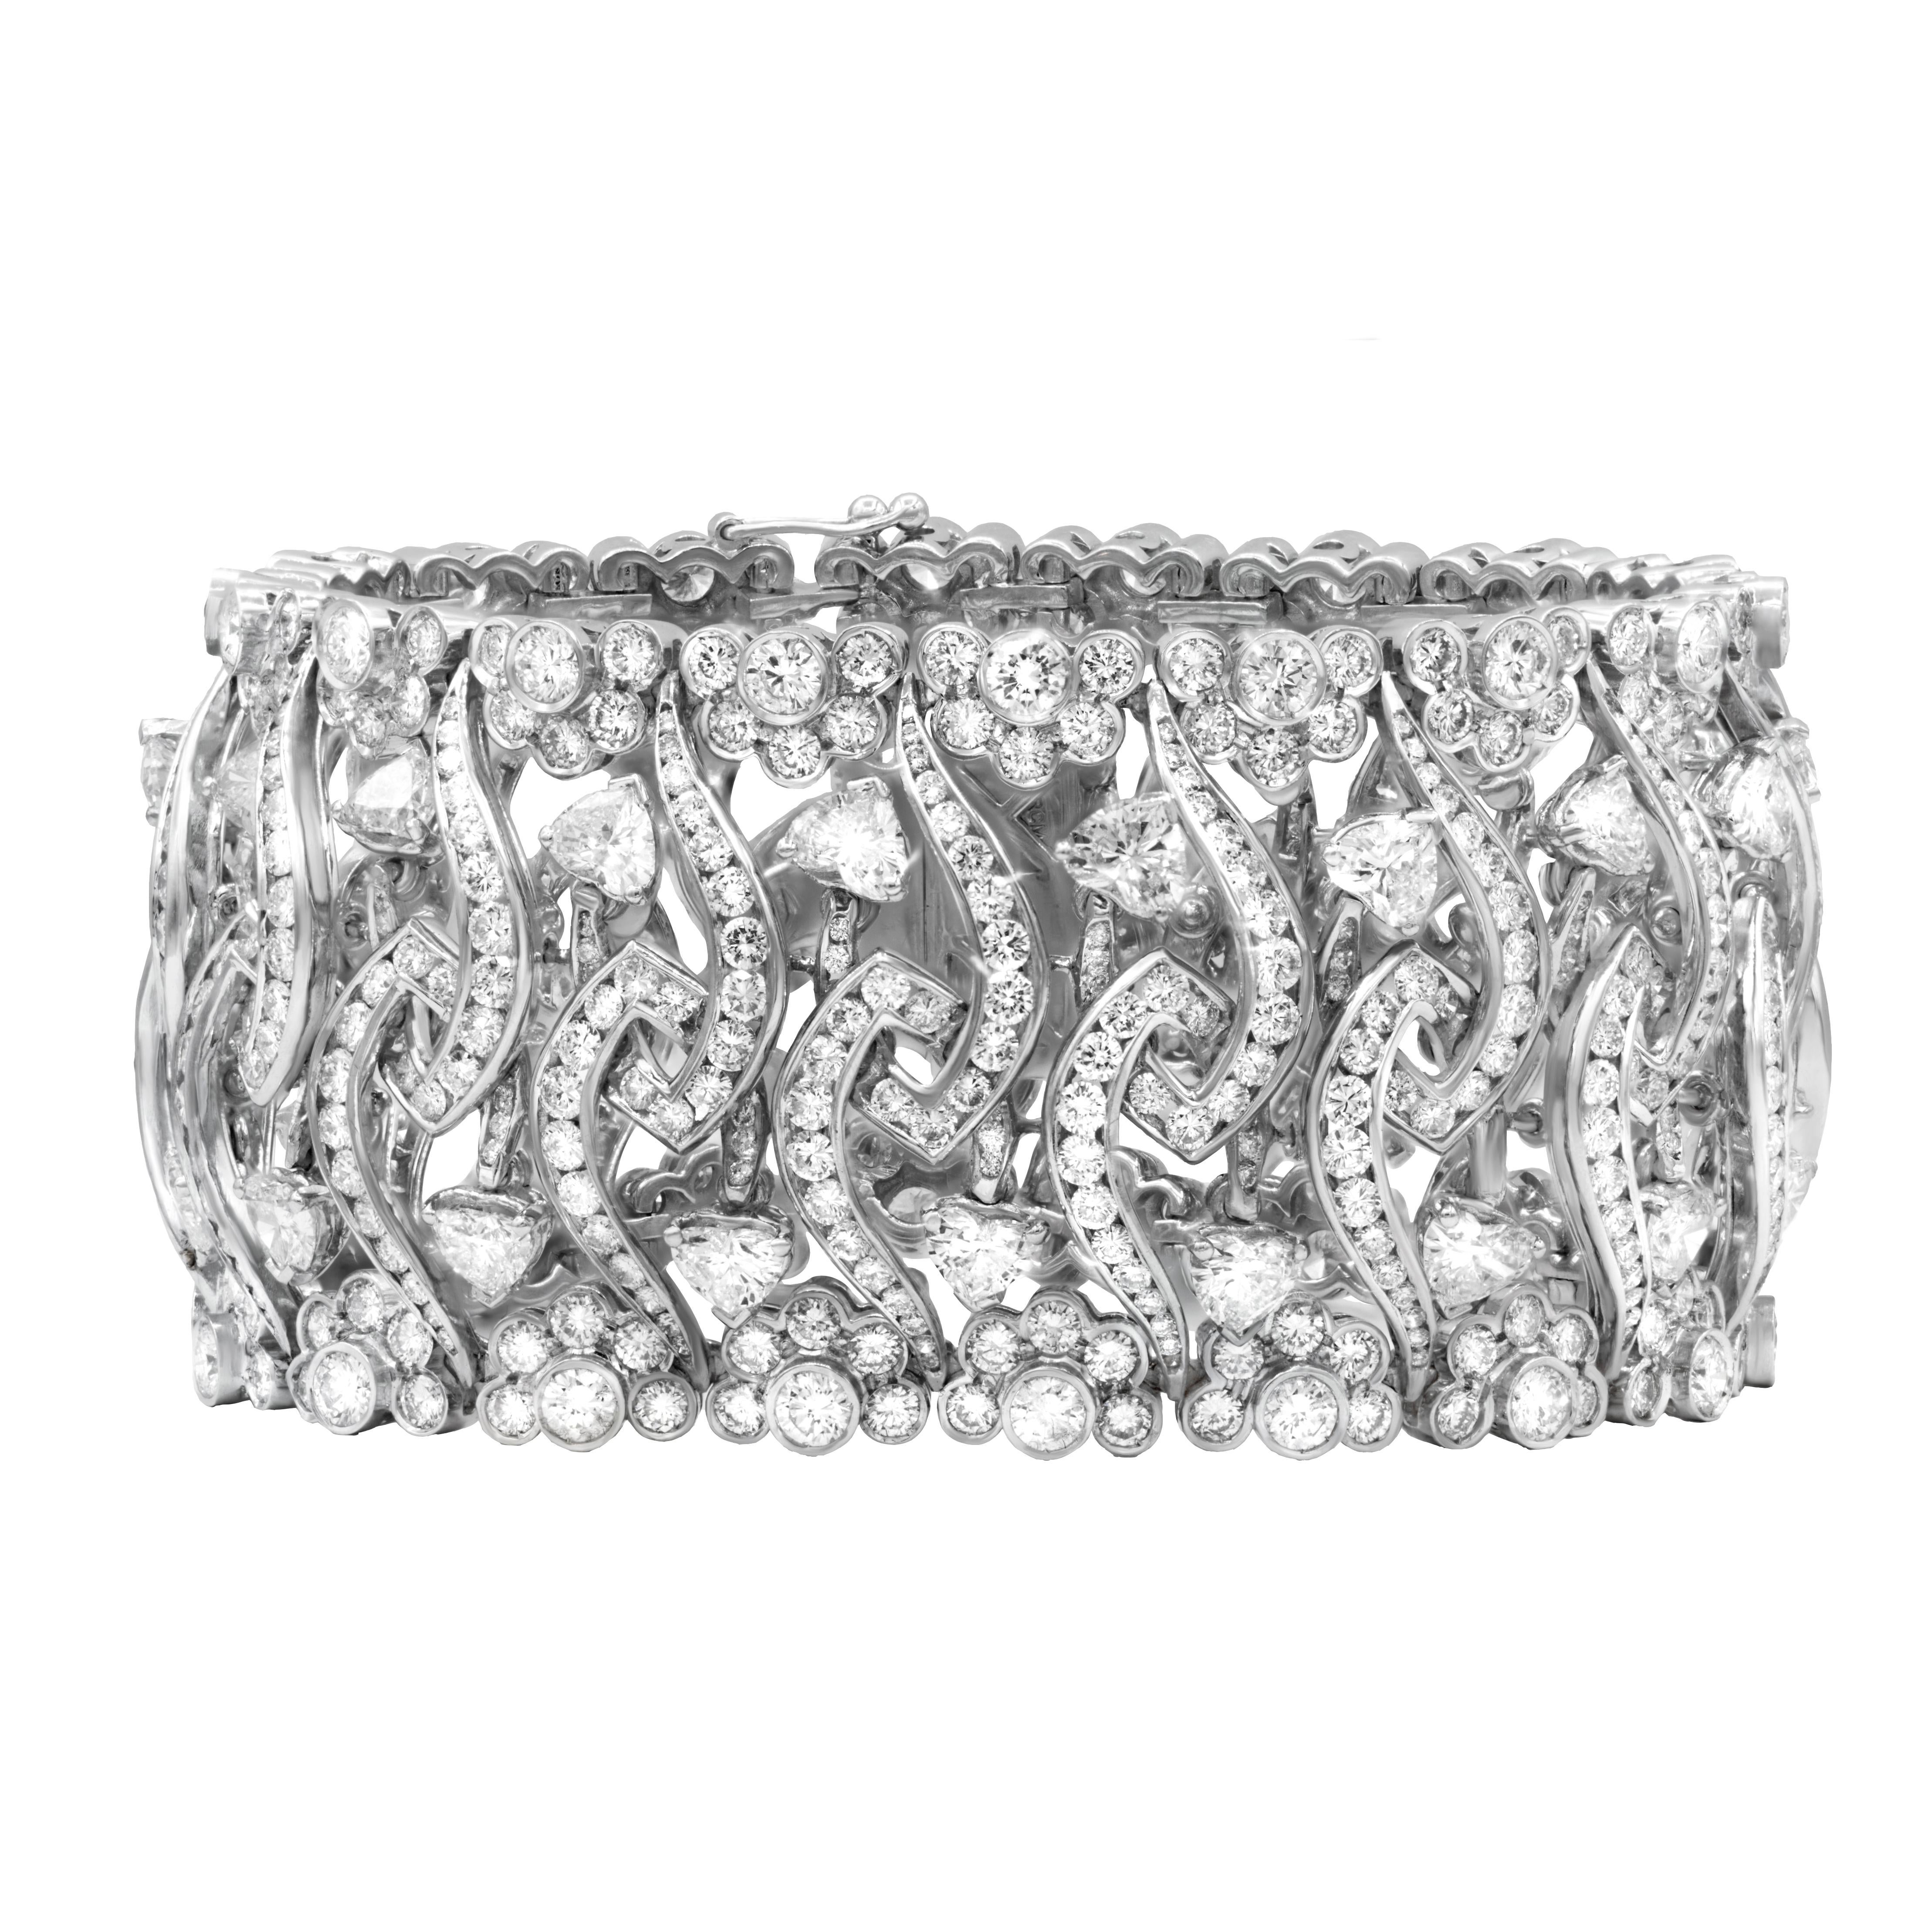 Modern Diana M. 18kt white gold wide, flexible fashion heart bracelet featuring 32.50ct For Sale